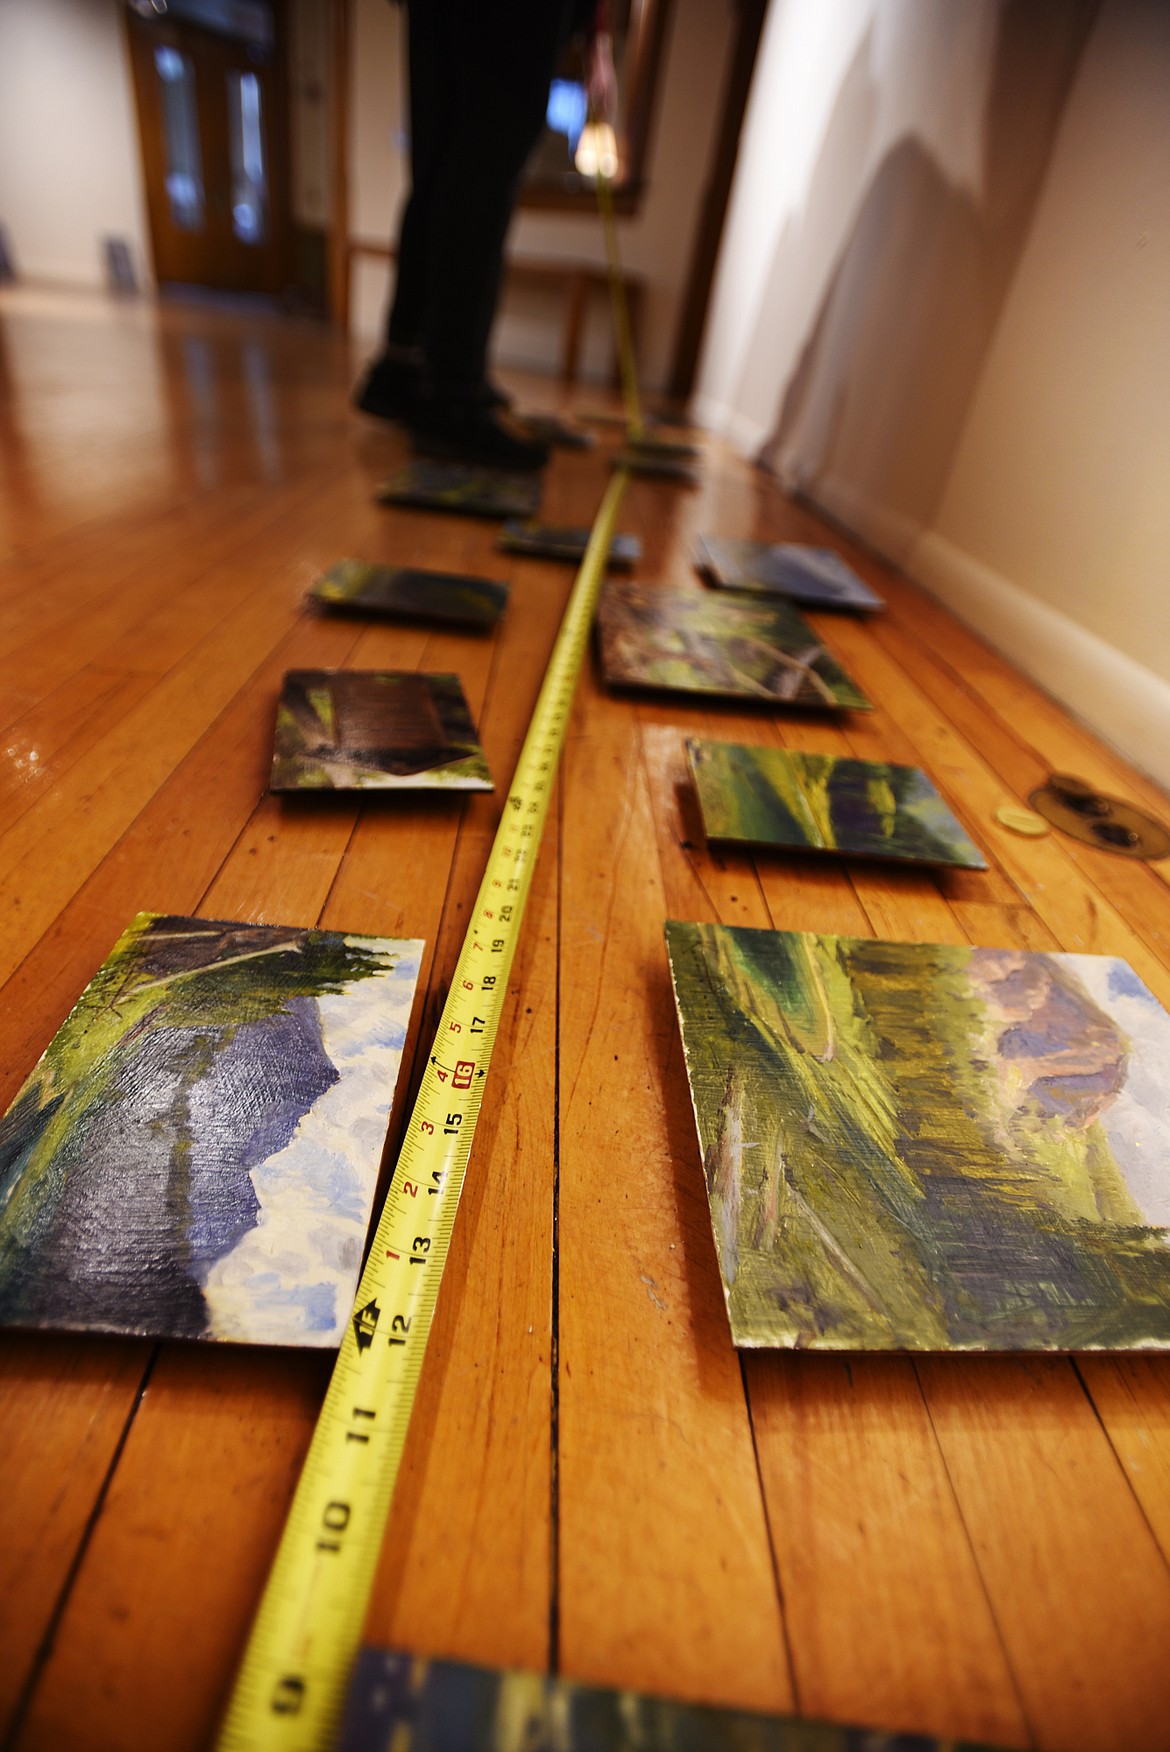 PAINTINGS ARE hung in the Hockaday Museum of Art in preparation for &quot;10 Days,&quot; an exhibition featuring works from Ken Yarus and Richie Carter. (Brenda Ahearn/This Week in the Flathead)